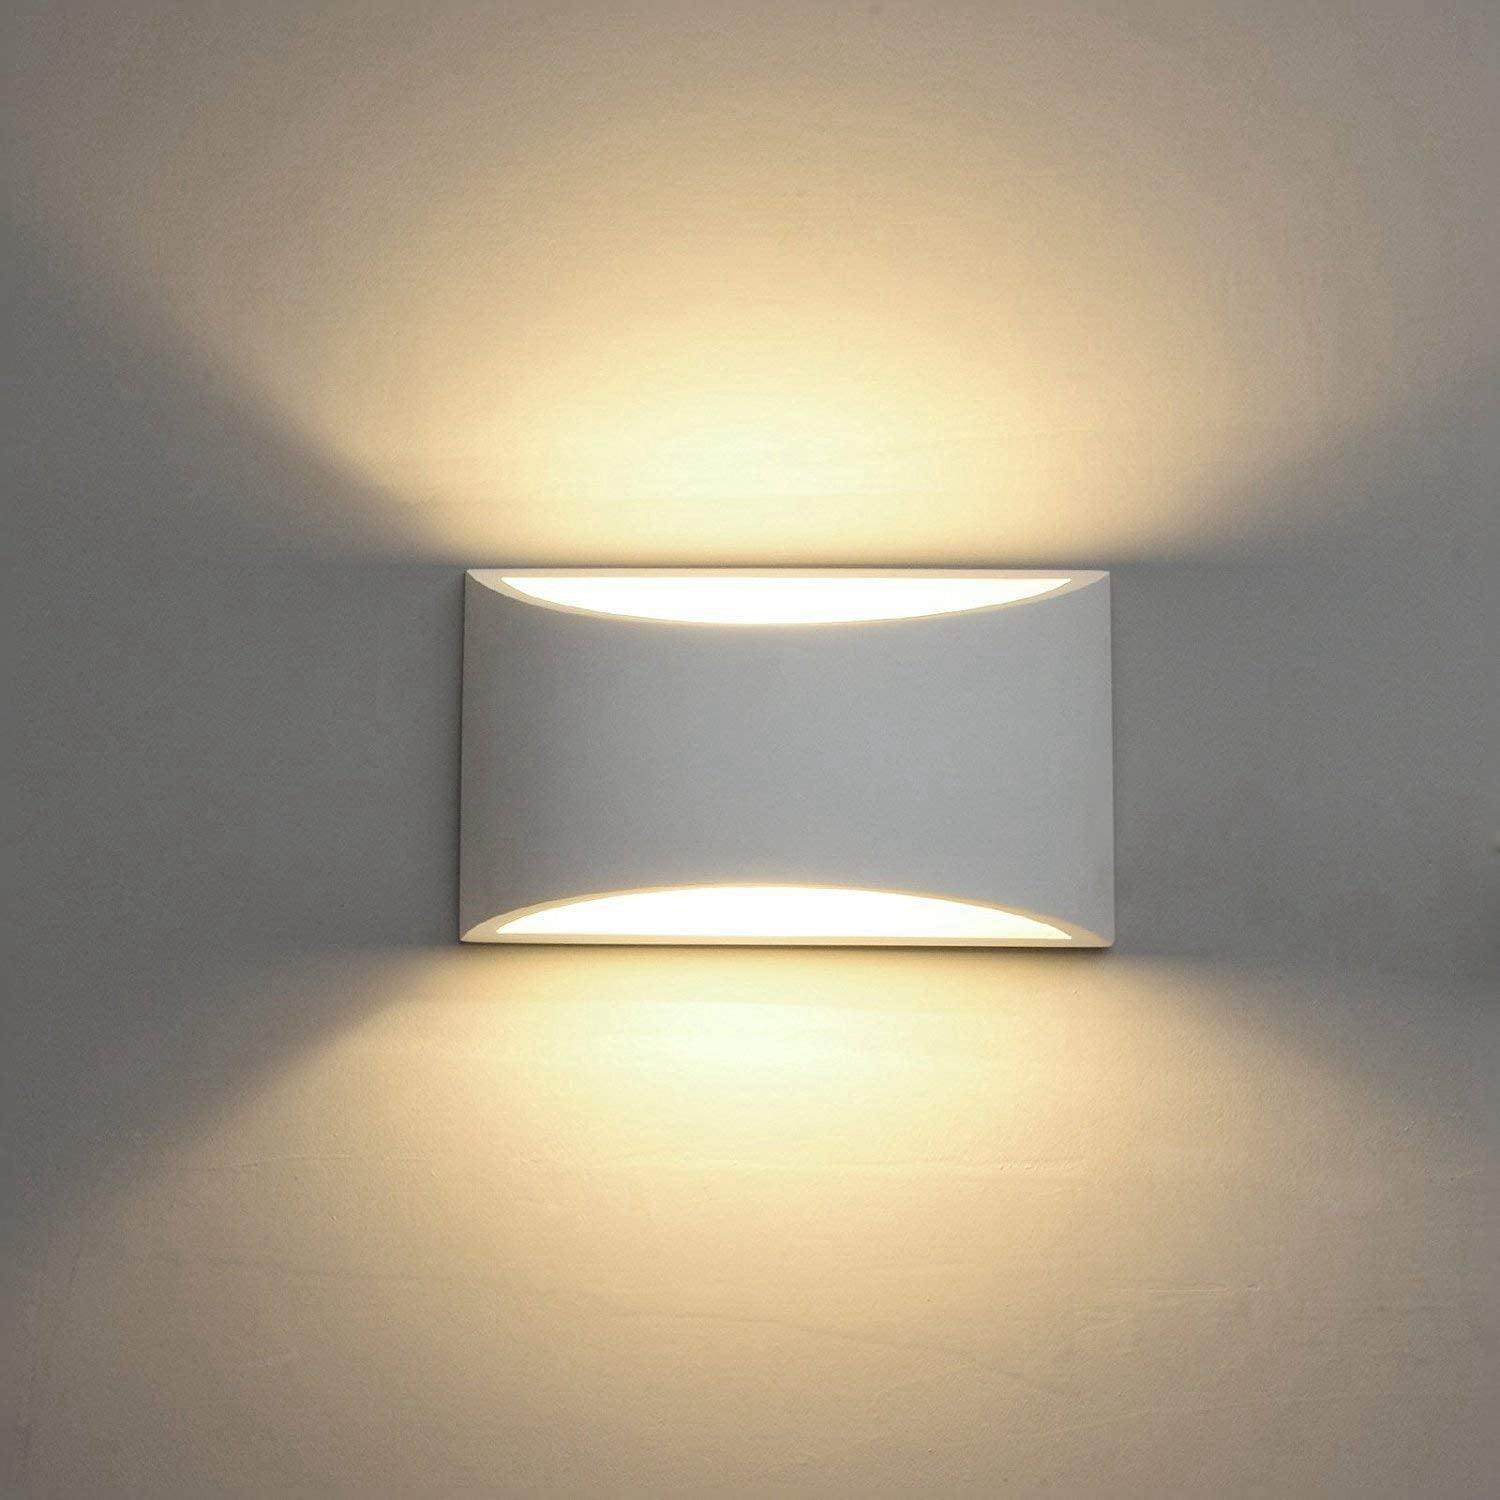 White Wall Lights For Living Room at August Wright blog